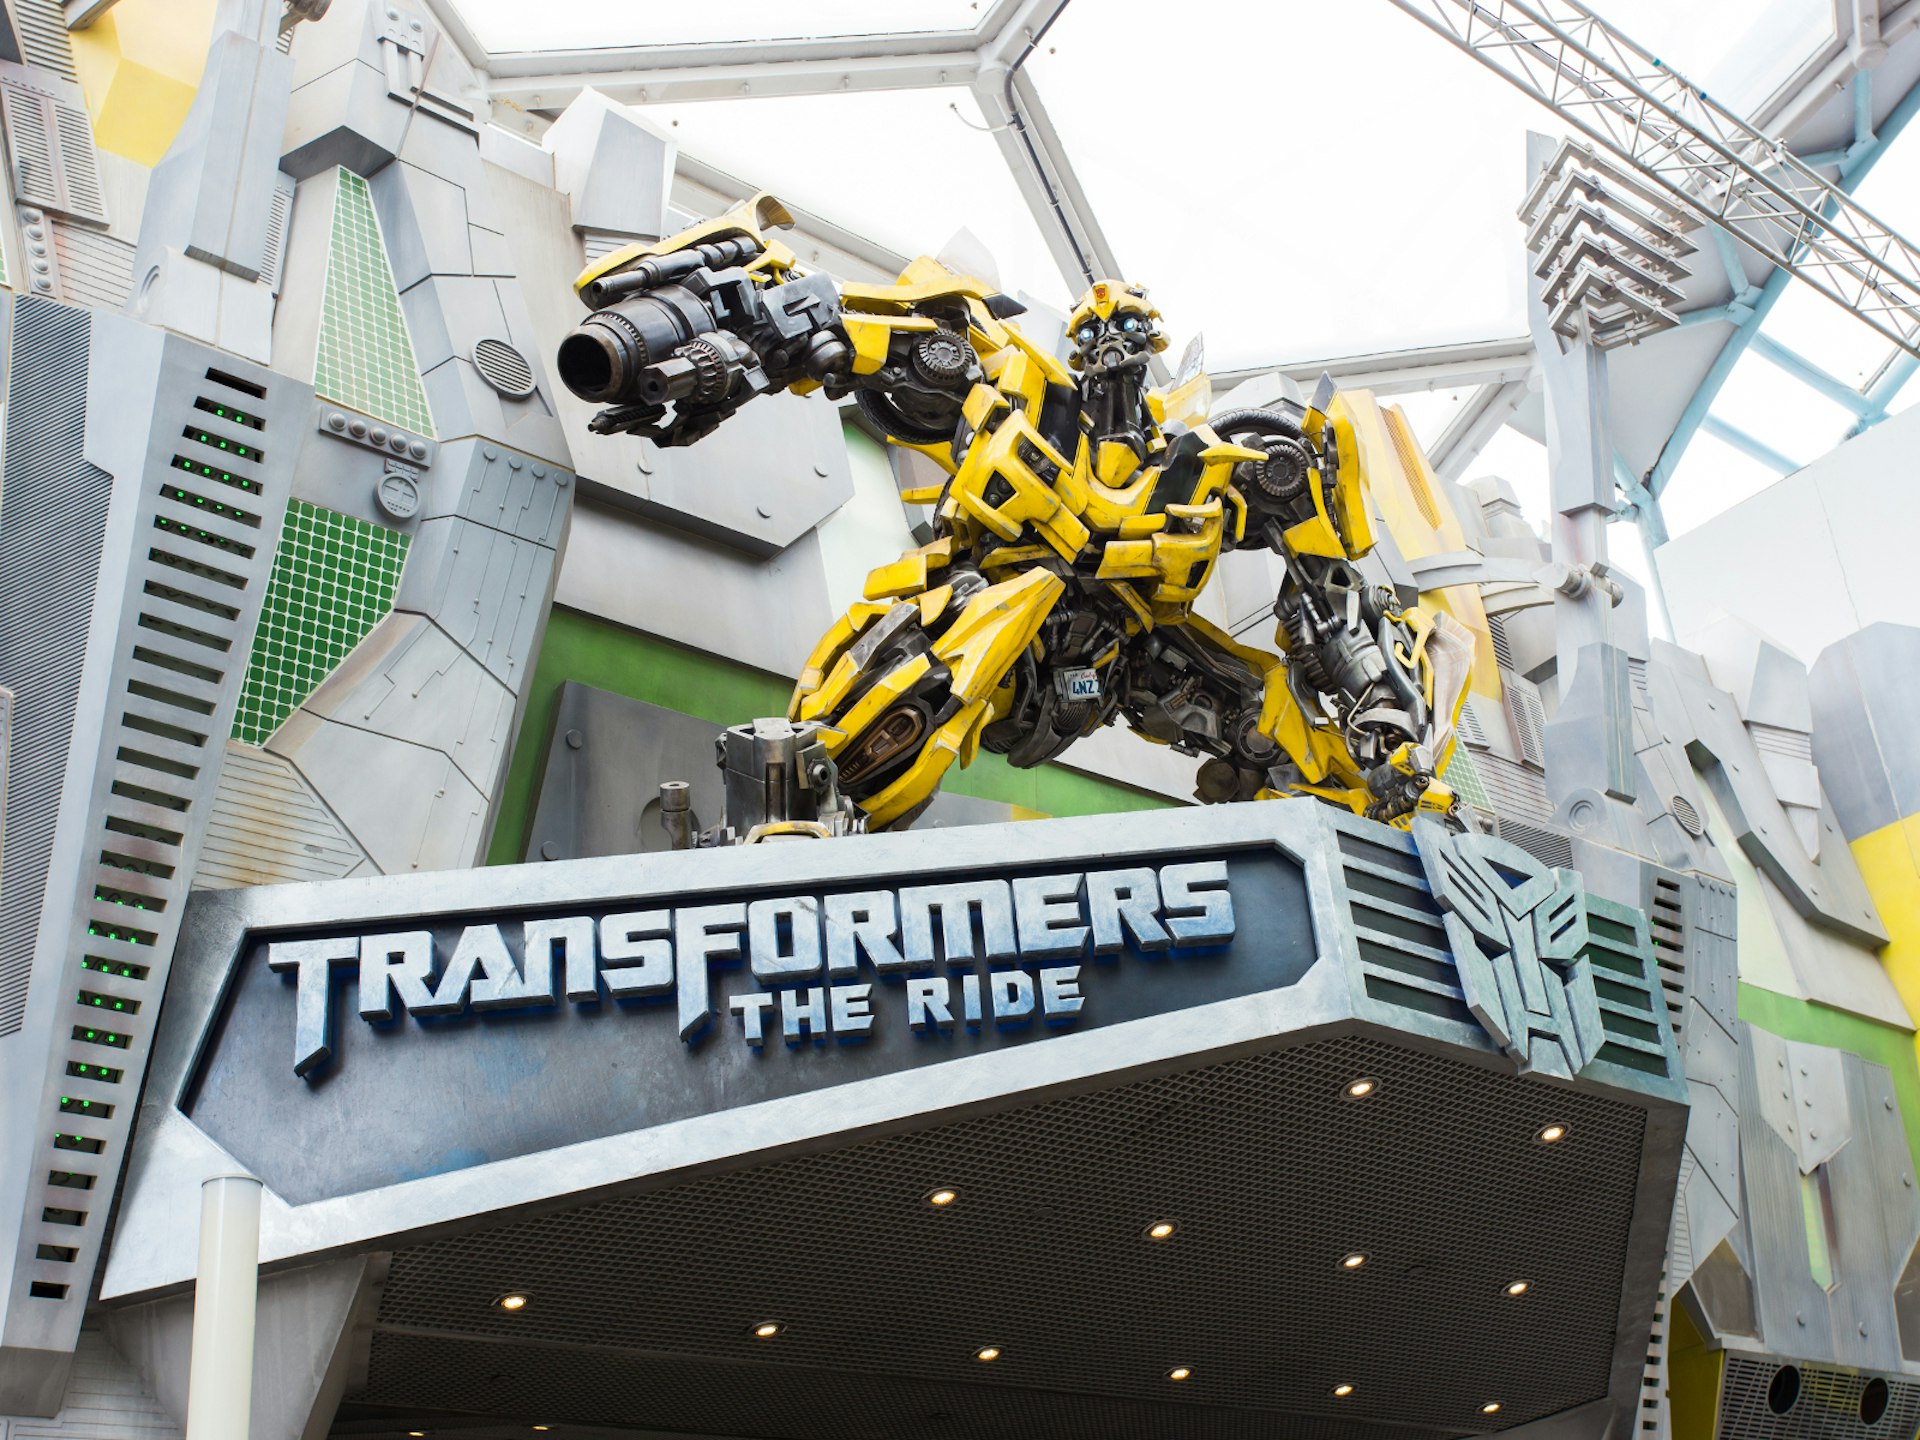 Disney alternatives - The dynamic 3D Transformers Ride at Universal Studios, Singapore. The character Bumblebee crouches above the entrance to the ride